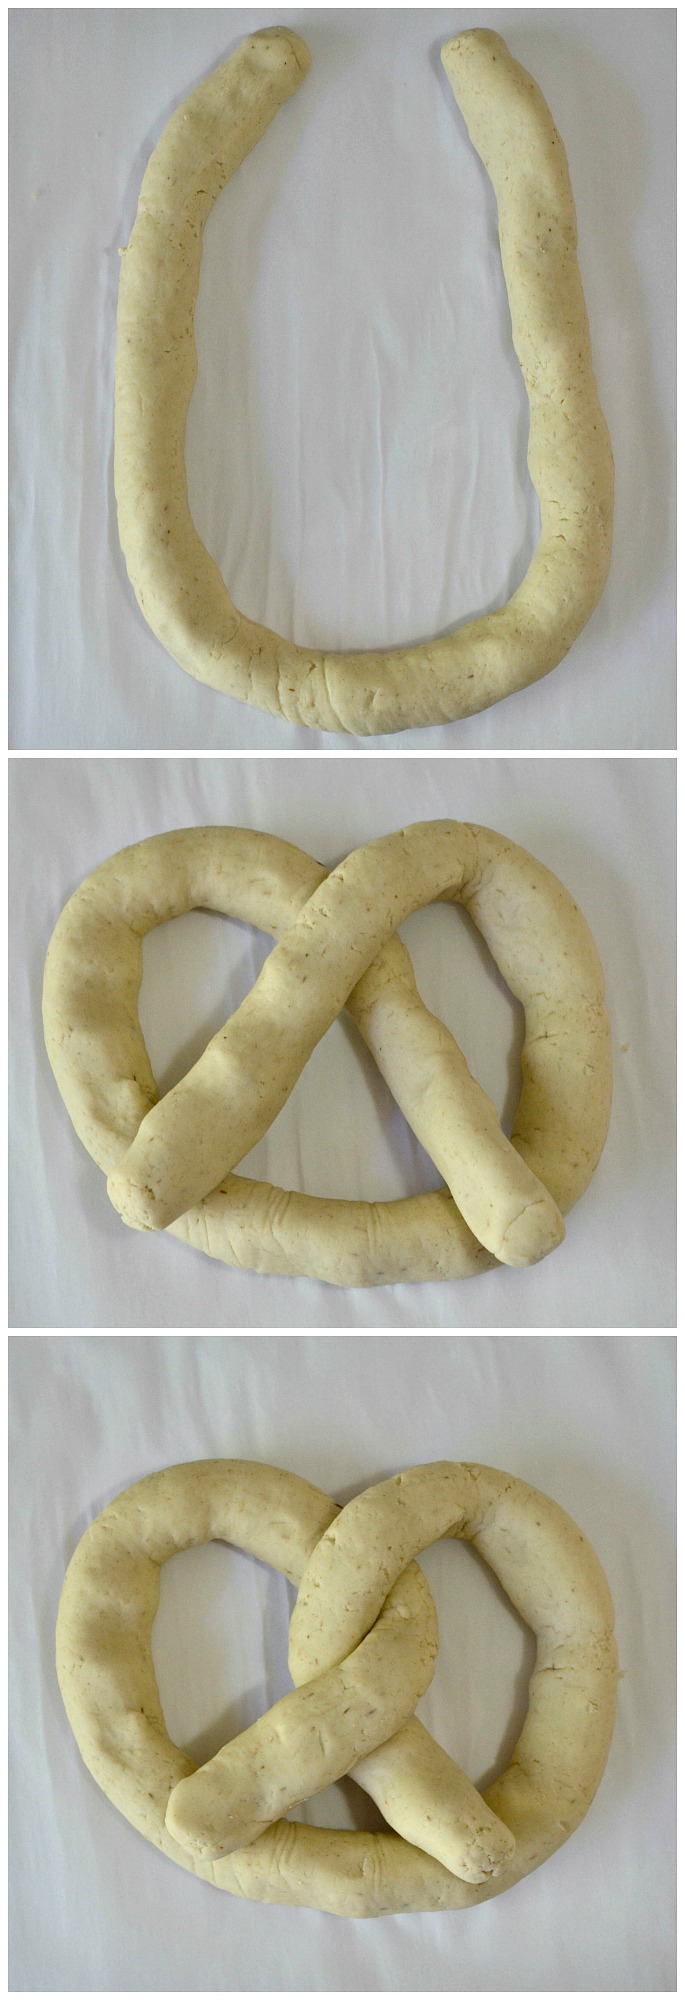 Easy-to-Make gluten free soft pretzels with a tutorial to help guide you.